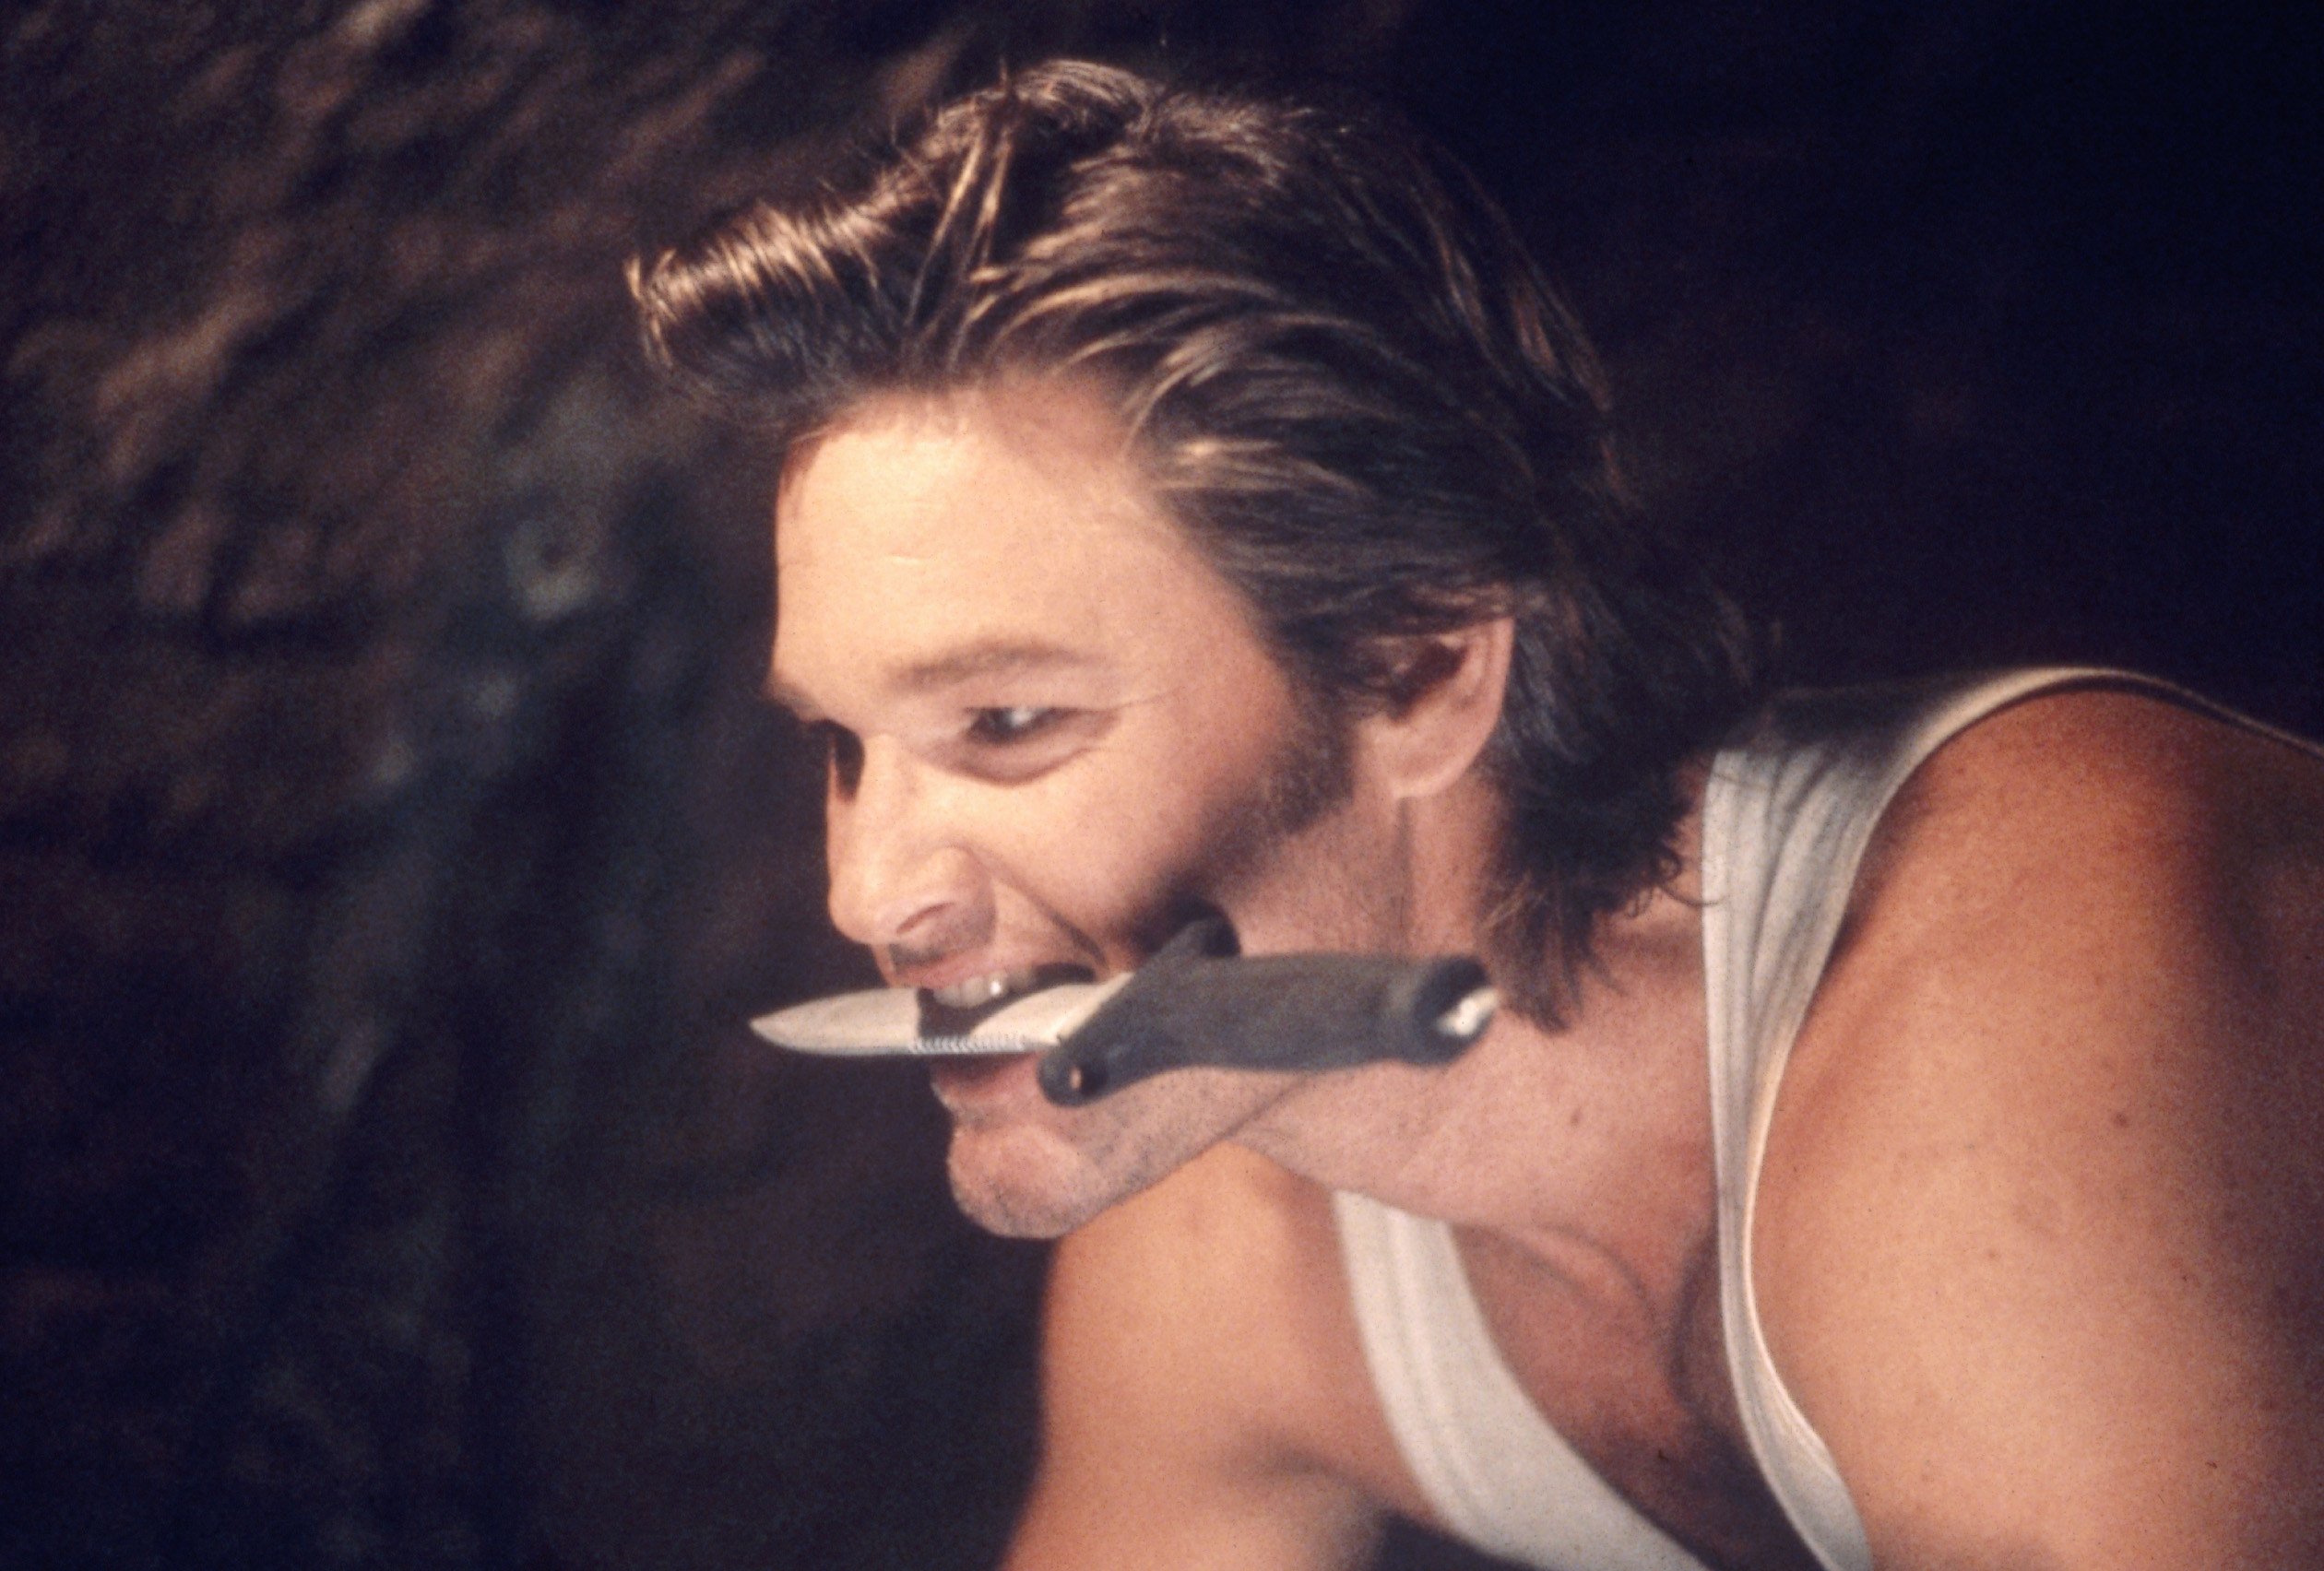 Kurt Russell with a knife in his mouth.